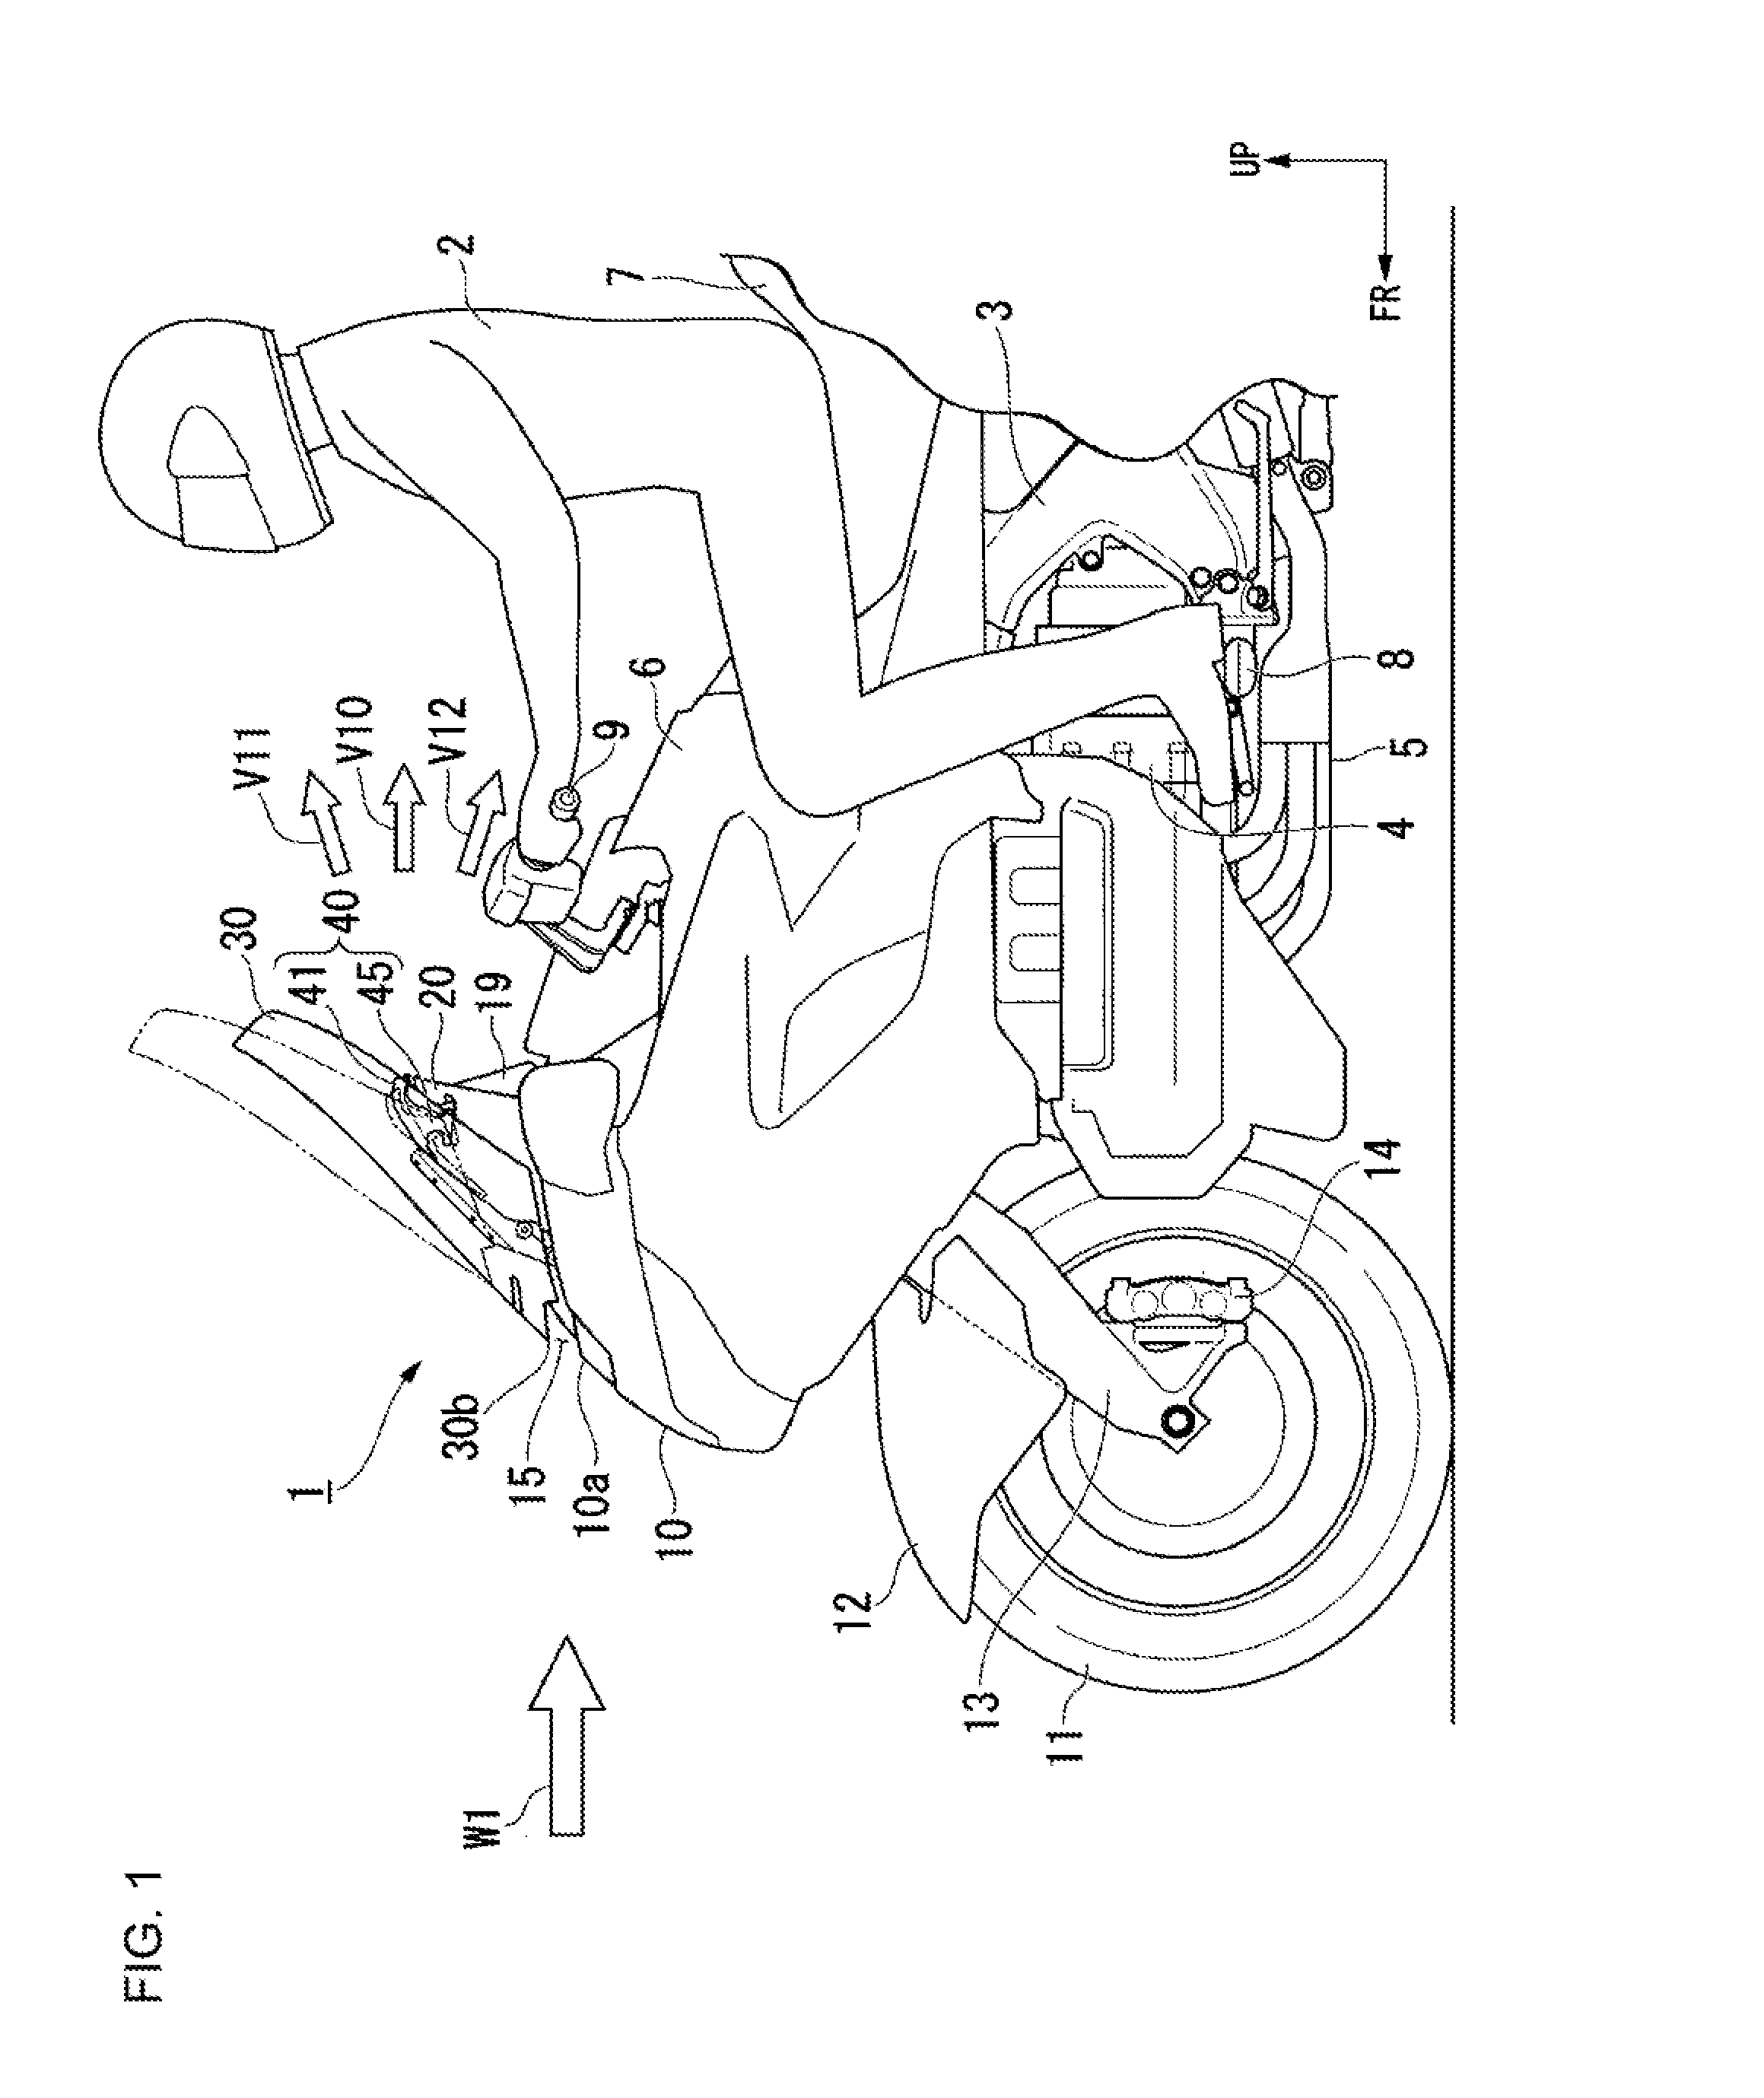 Traveling wind intake structure for saddled vehicle